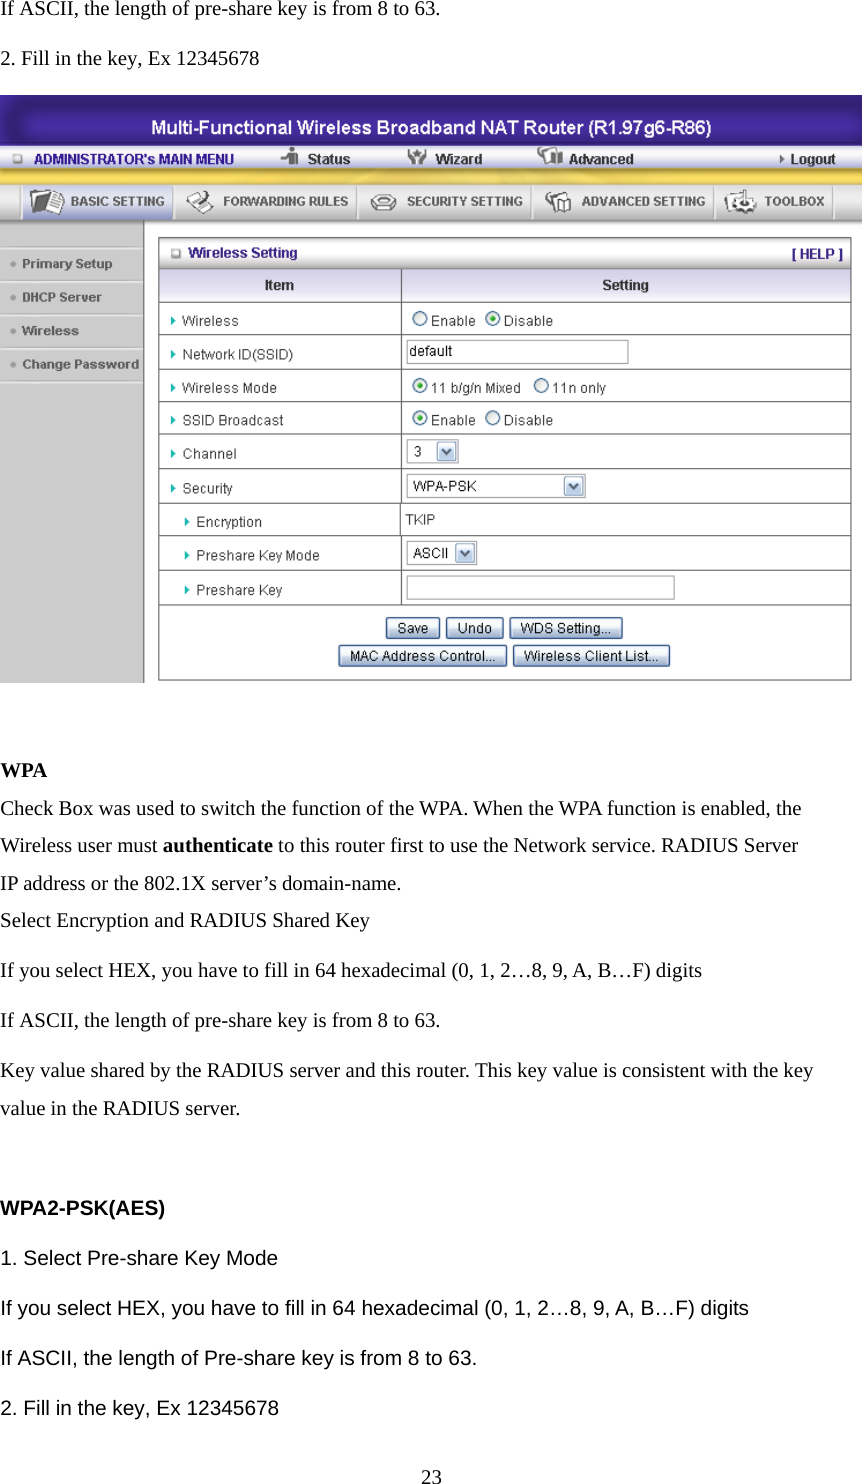 If ASCII, the length of pre-share key is from 8 to 63. 2. Fill in the key, Ex 12345678   WPA Check Box was used to switch the function of the WPA. When the WPA function is enabled, the Wireless user must authenticate to this router first to use the Network service. RADIUS Server IP address or the 802.1X server’s domain-name.   Select Encryption and RADIUS Shared Key If you select HEX, you have to fill in 64 hexadecimal (0, 1, 2…8, 9, A, B…F) digits If ASCII, the length of pre-share key is from 8 to 63. Key value shared by the RADIUS server and this router. This key value is consistent with the key value in the RADIUS server.  WPA2-PSK(AES) 1. Select Pre-share Key Mode If you select HEX, you have to fill in 64 hexadecimal (0, 1, 2…8, 9, A, B…F) digits If ASCII, the length of Pre-share key is from 8 to 63. 2. Fill in the key, Ex 12345678  23